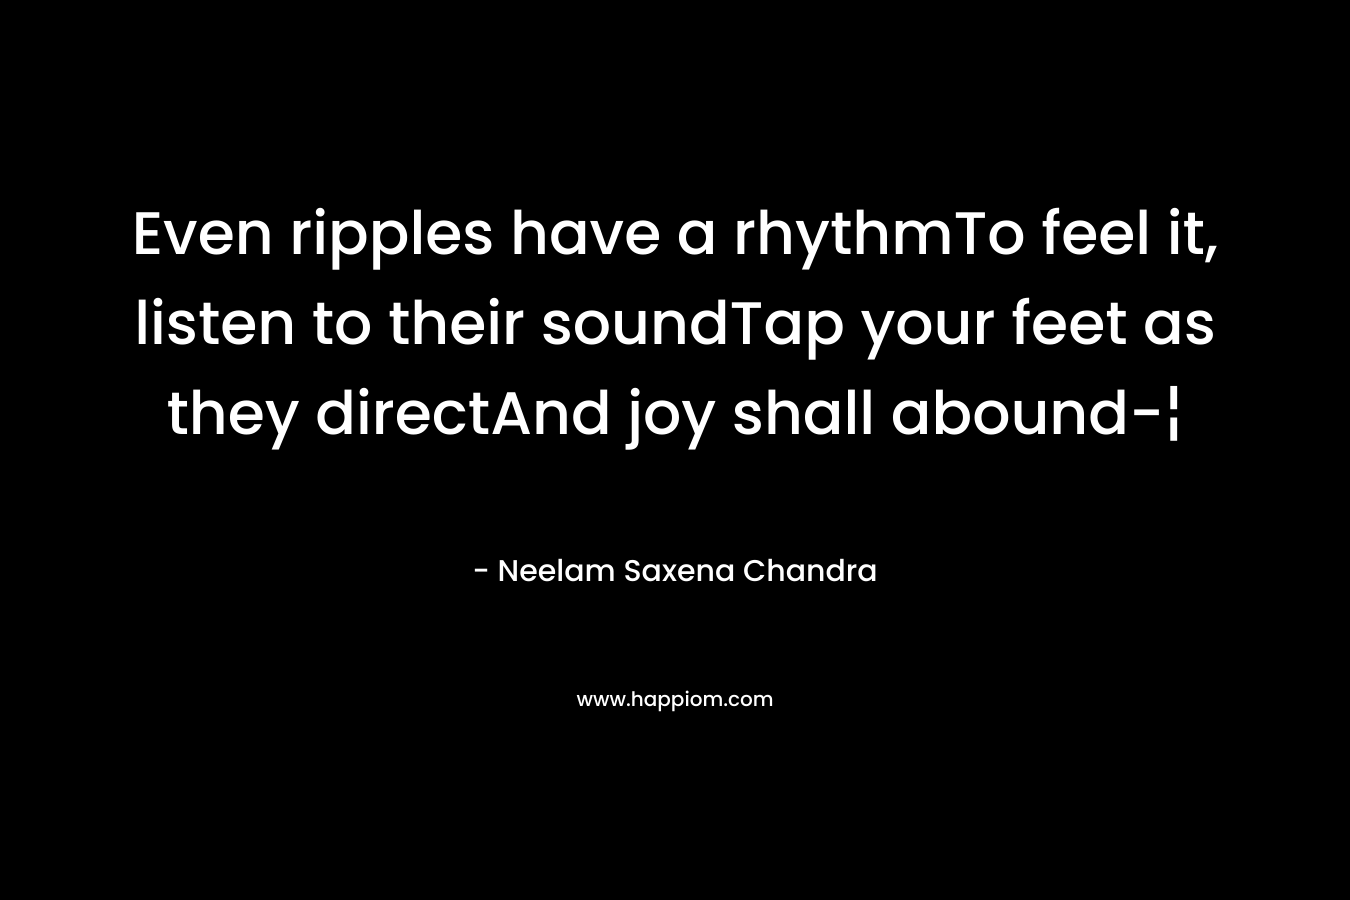 Even ripples have a rhythmTo feel it, listen to their soundTap your feet as they directAnd joy shall abound-¦ – Neelam Saxena Chandra